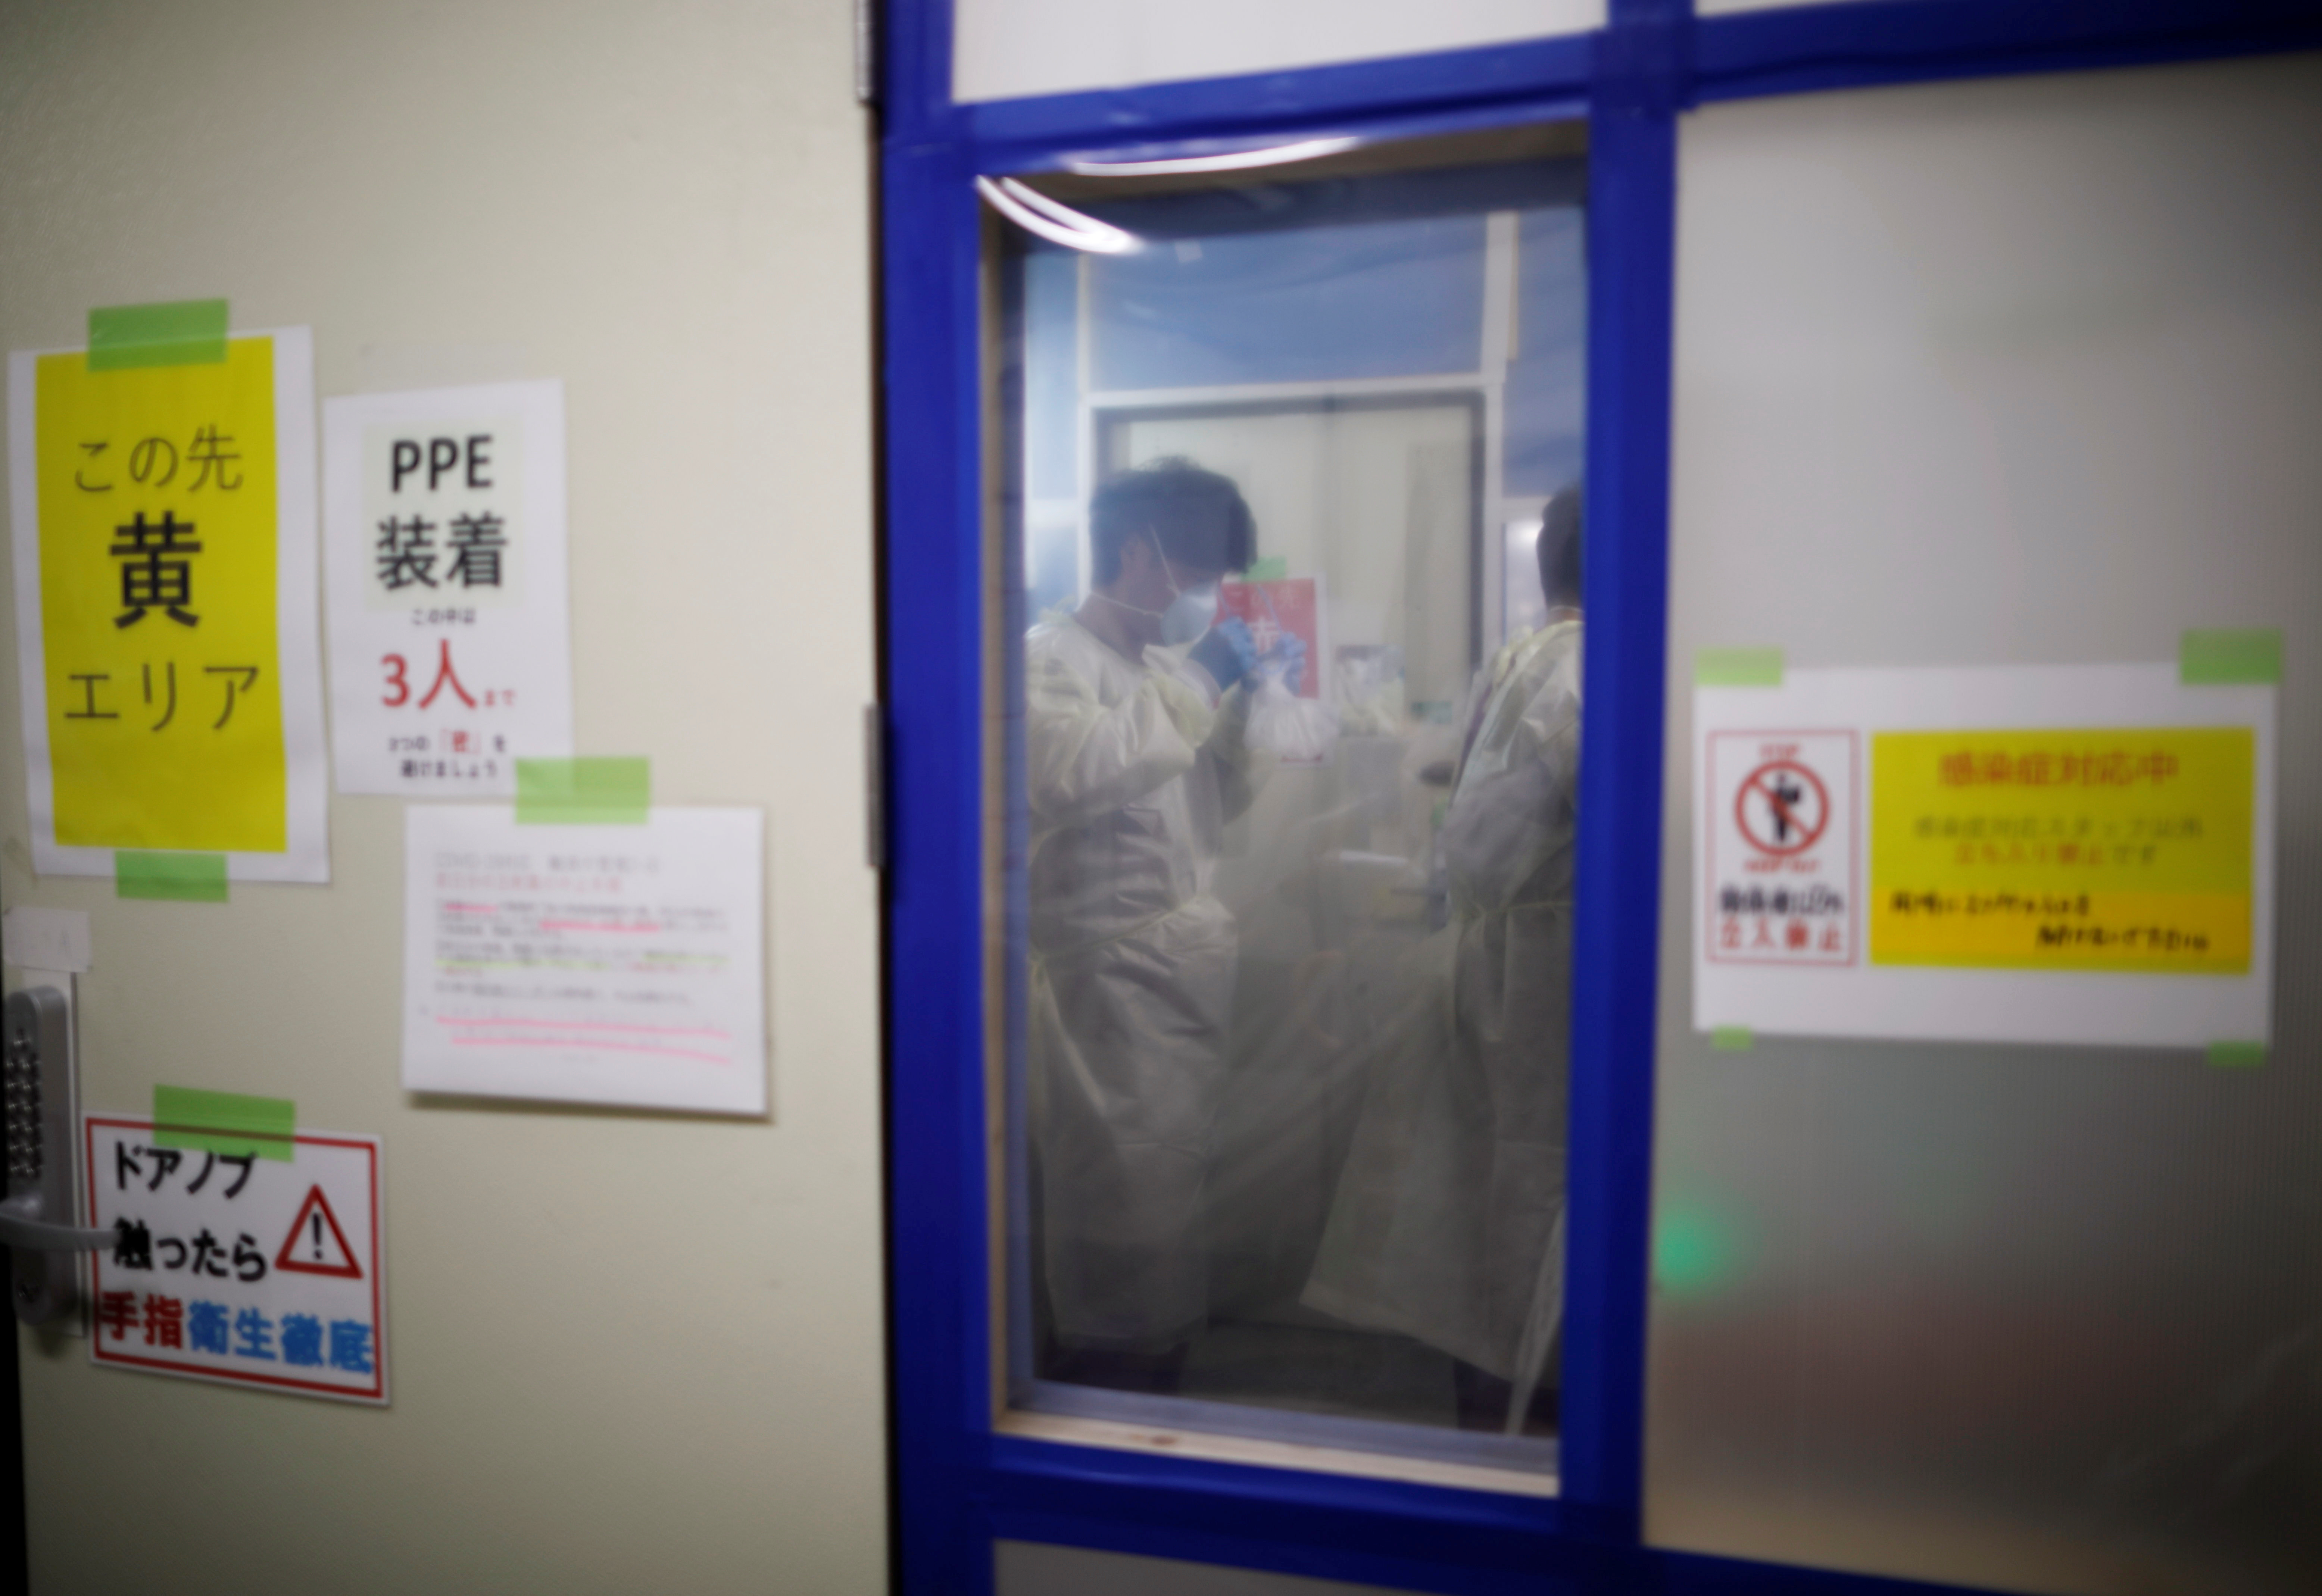 Medical workers prepare to put on PPE as they work in the ICU for the coronavirus disease (COVID-19) patients at St. Marianna Medical University Hospital in Kawasaki, Japan